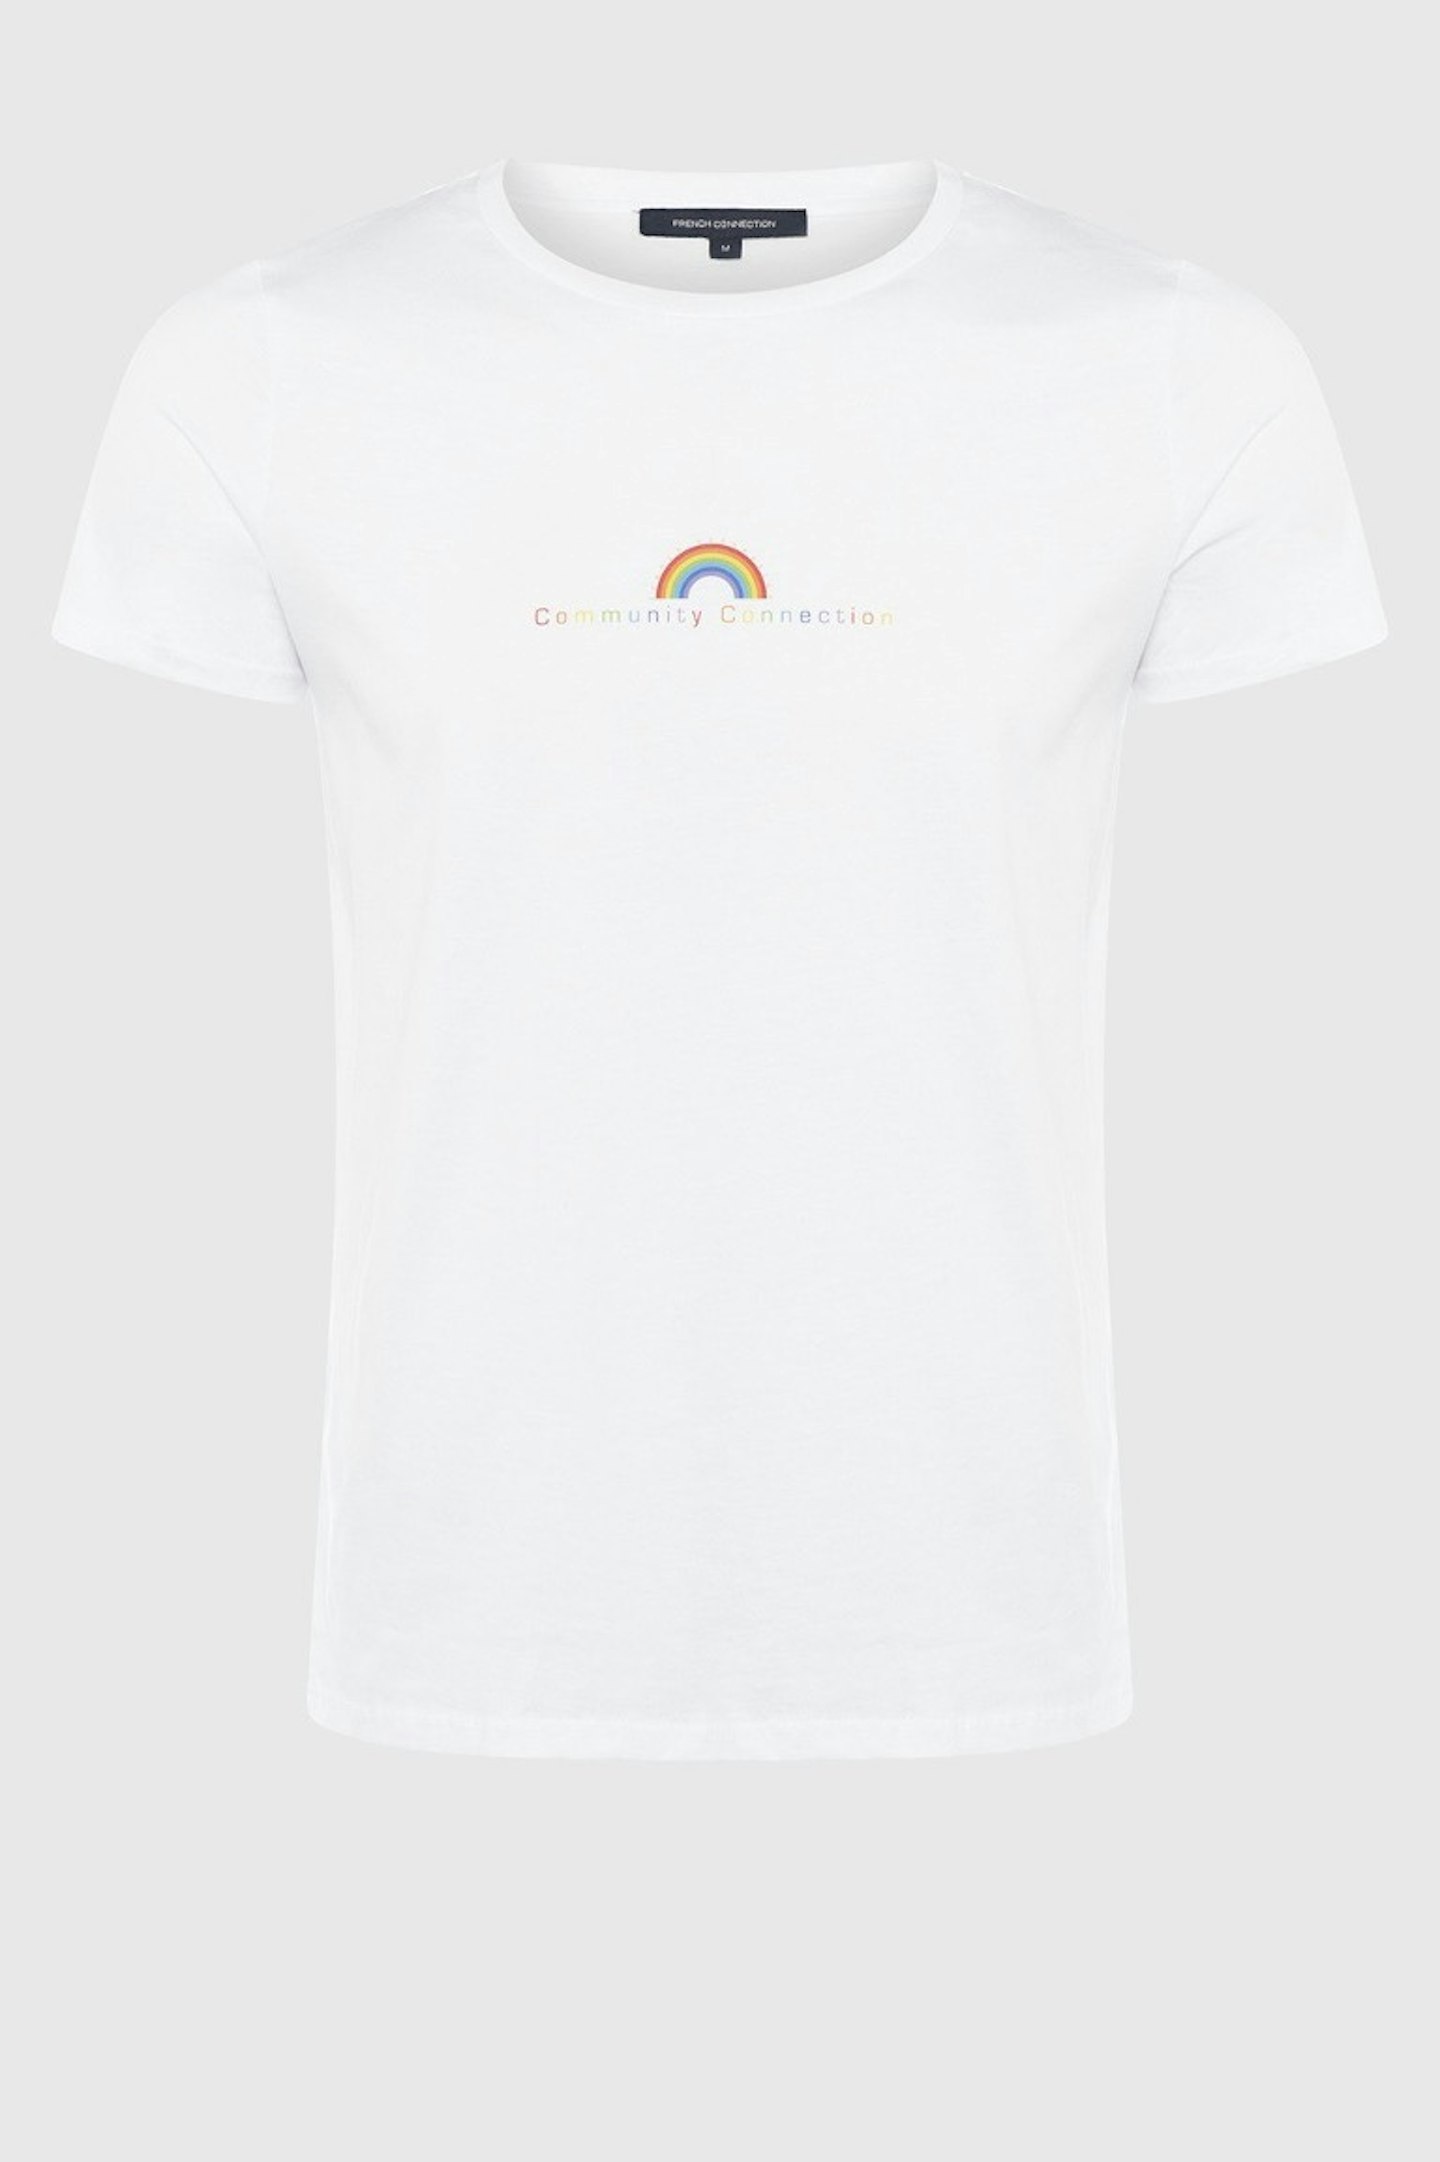 French Connection, RAINBOW CONNECTION CHARITY T-SHIRT, £25